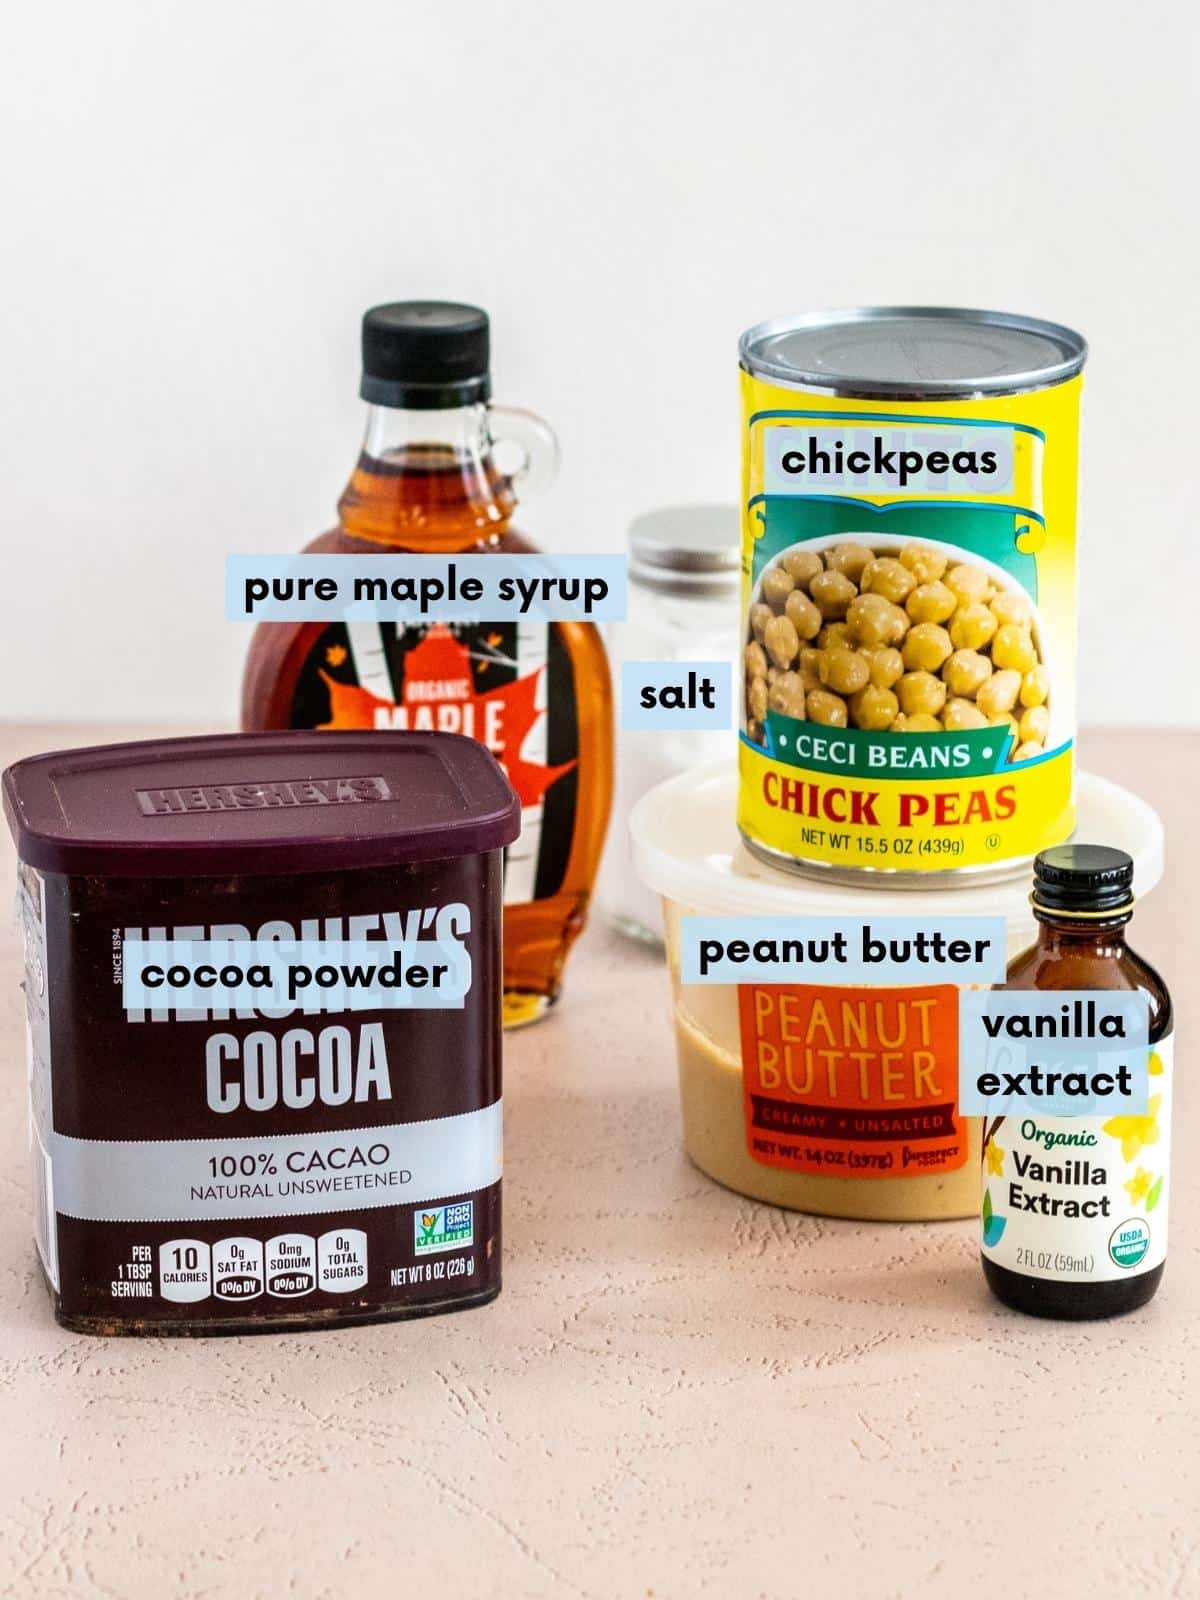 Container of cocoa powder, bottle of pure maple syrup, salt, can of chickpeas, tub of peanut butter, and bottle of vanilla extract.